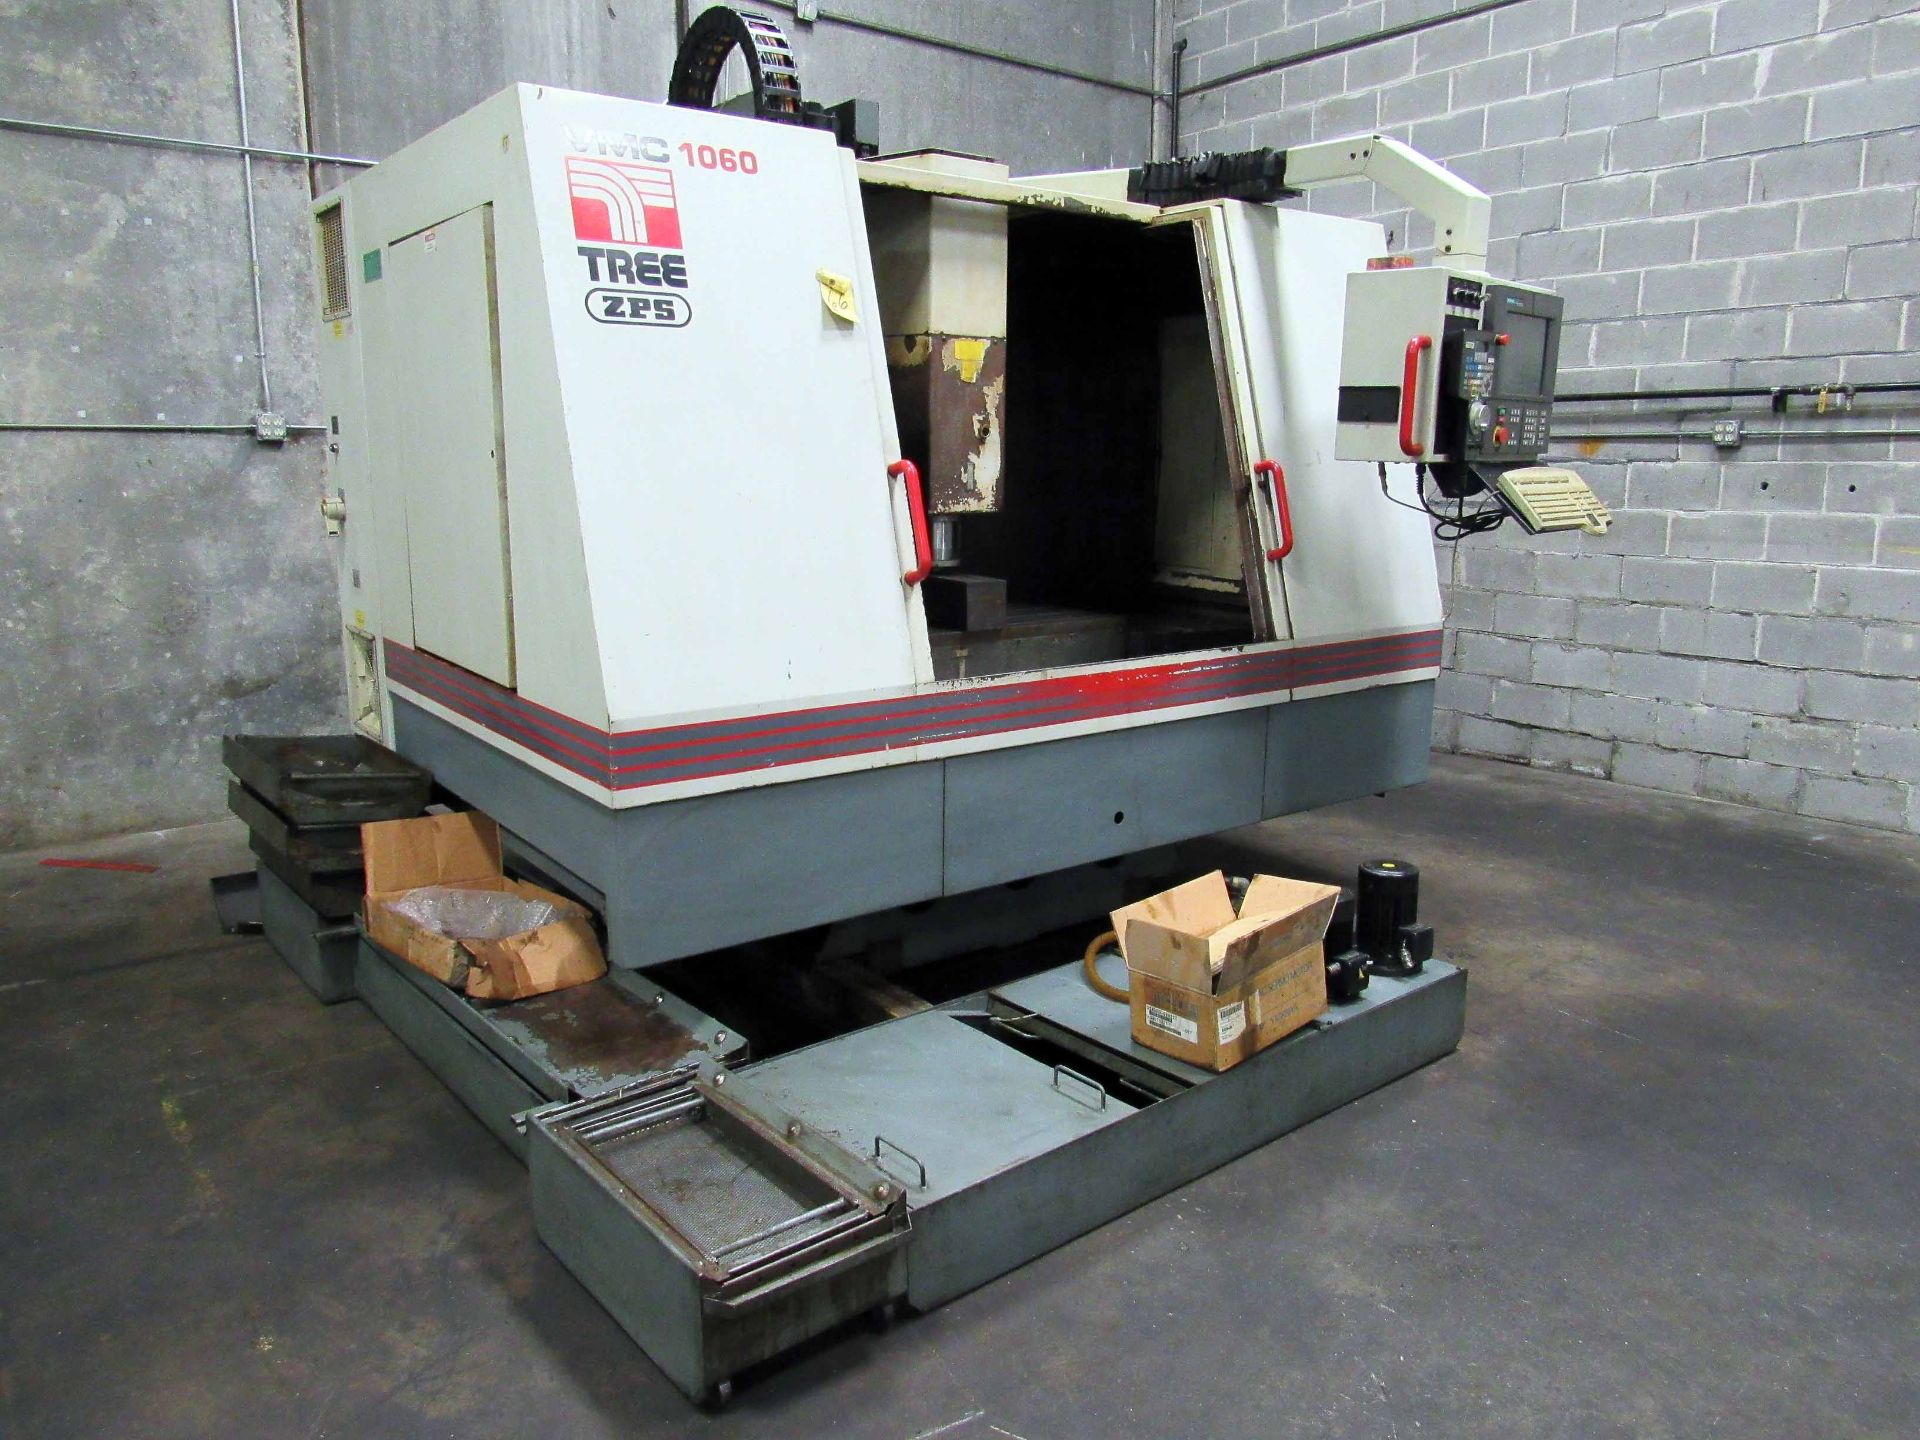 CNC VERTICAL MACHINING CENTER, TREE MDL. 1060/24, Acramatic 2100 CNC control, 50" x 23" table, 4" - Image 2 of 8